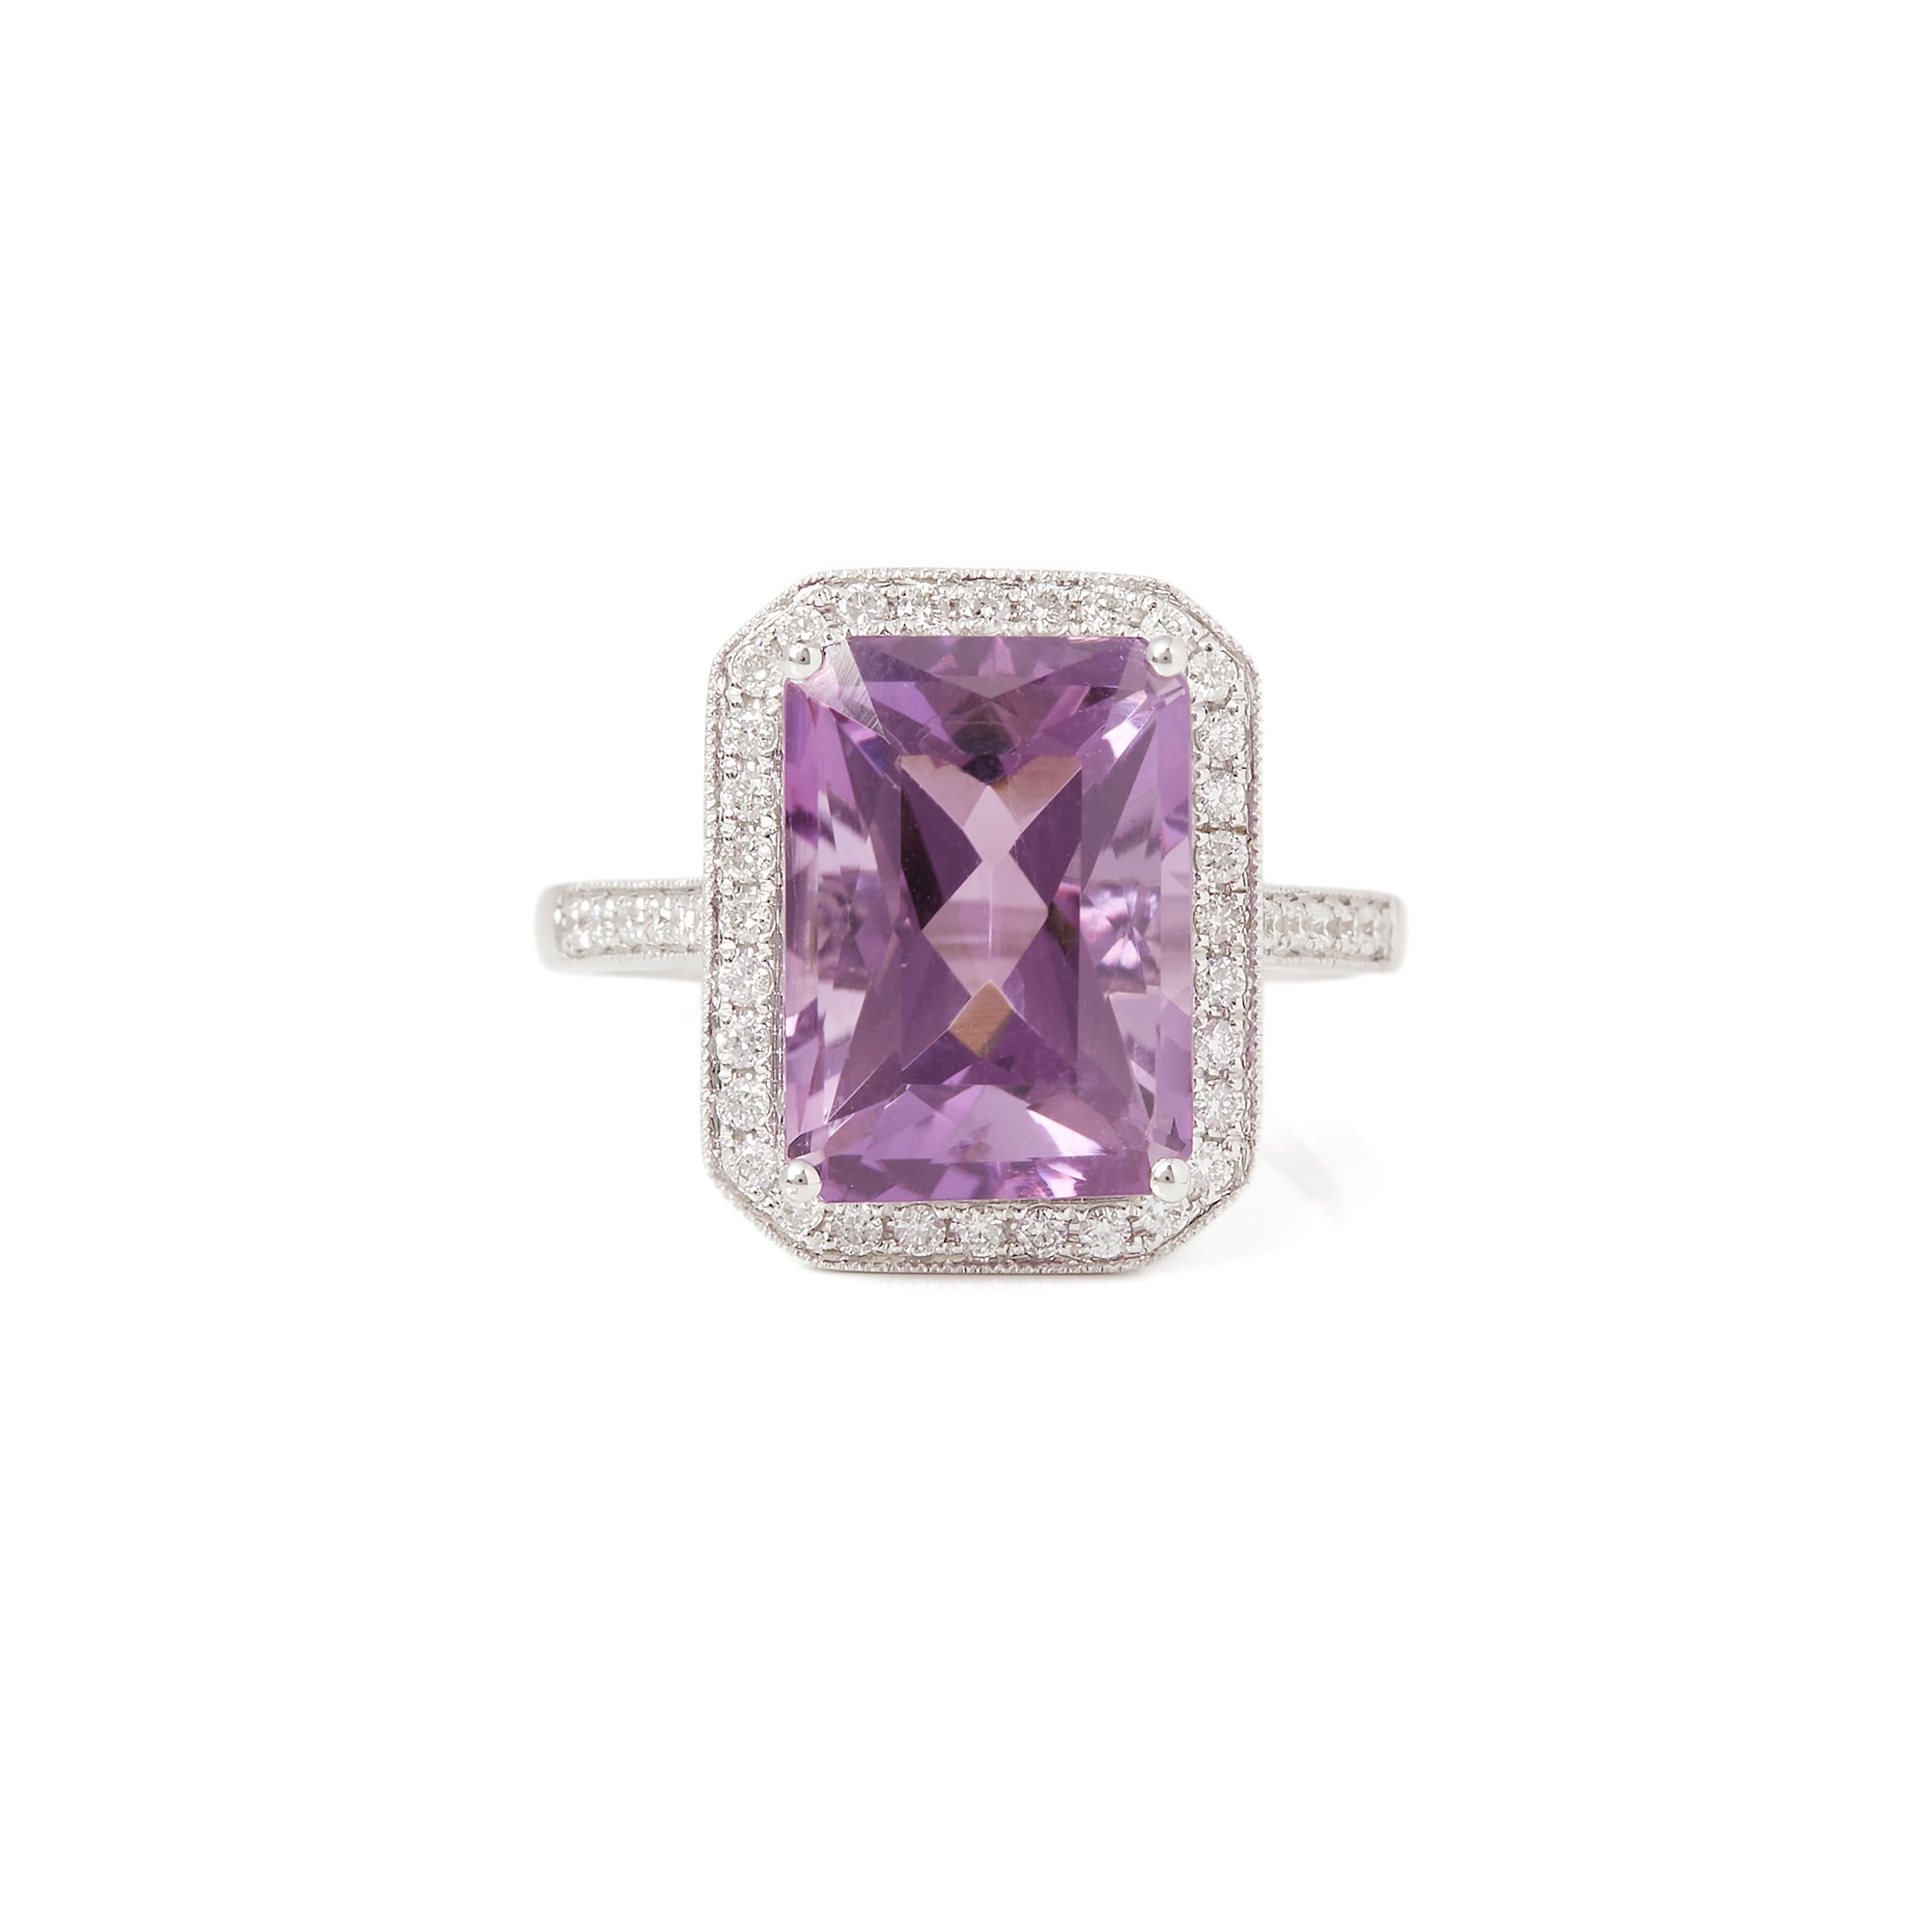 David Jerome Certified 6.32ct Amethyst and Diamond 18ct Gold Ring